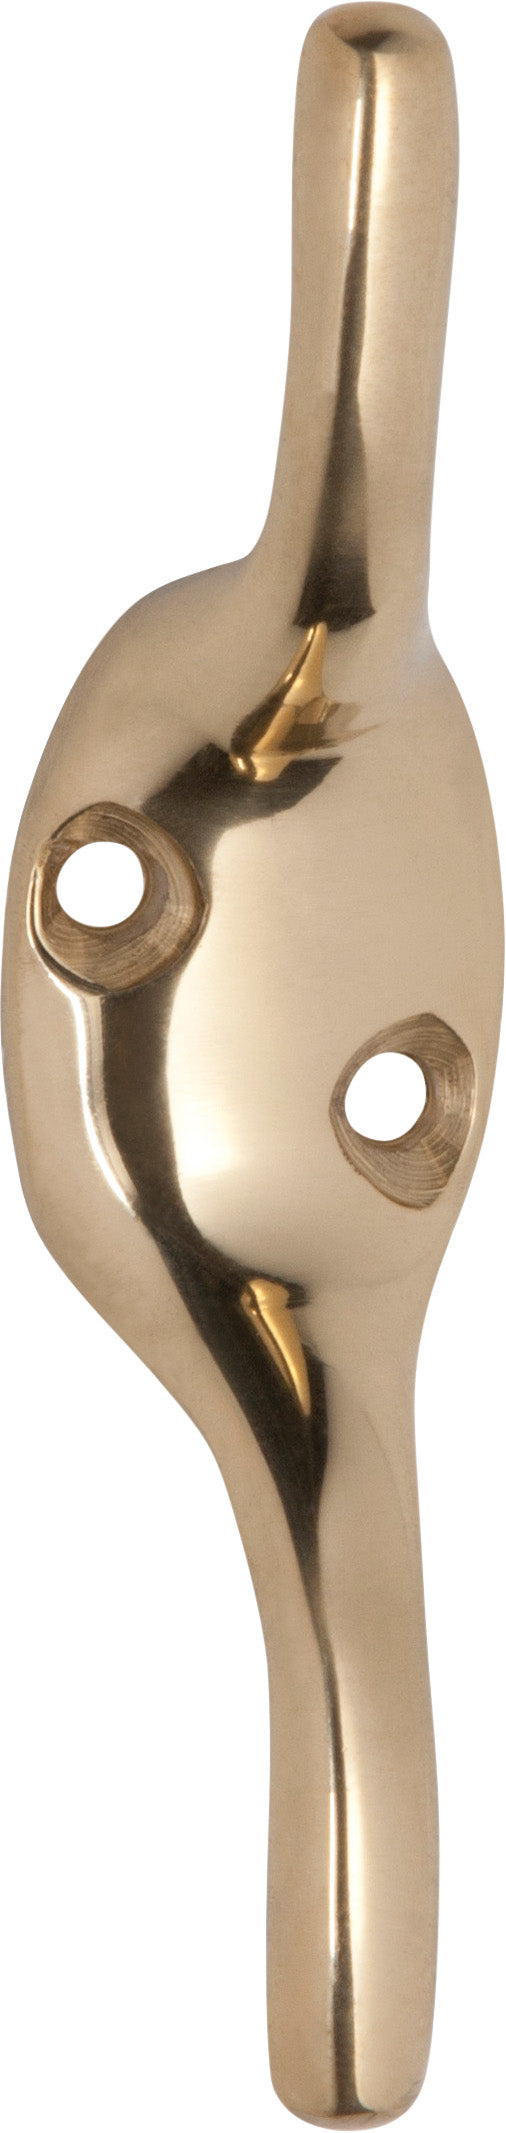 Cleat Hook Polished Brass H75xP20mm